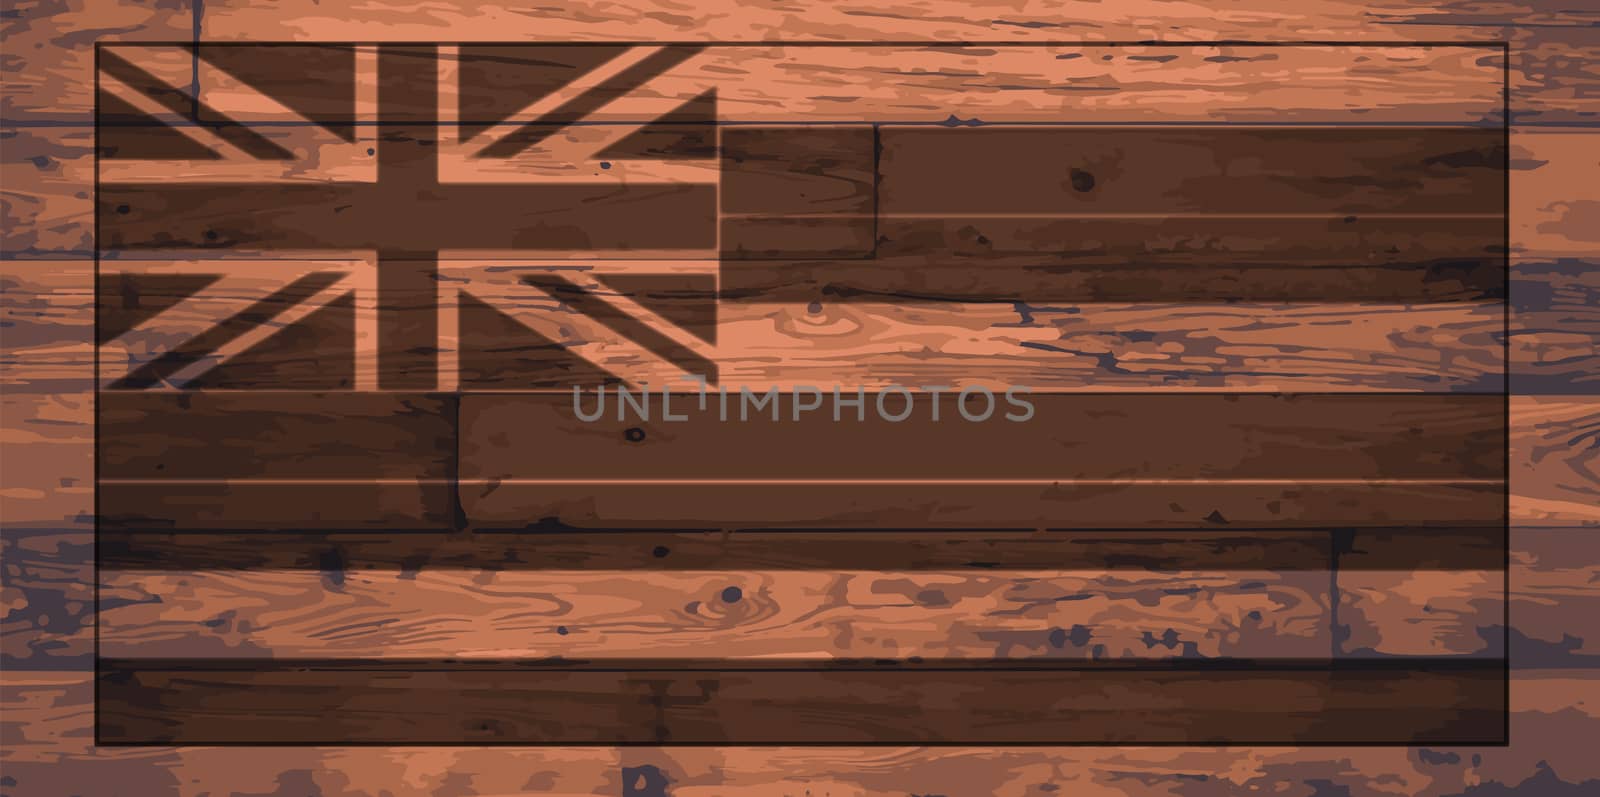 Hawaii State Flag branded onto wooden planks